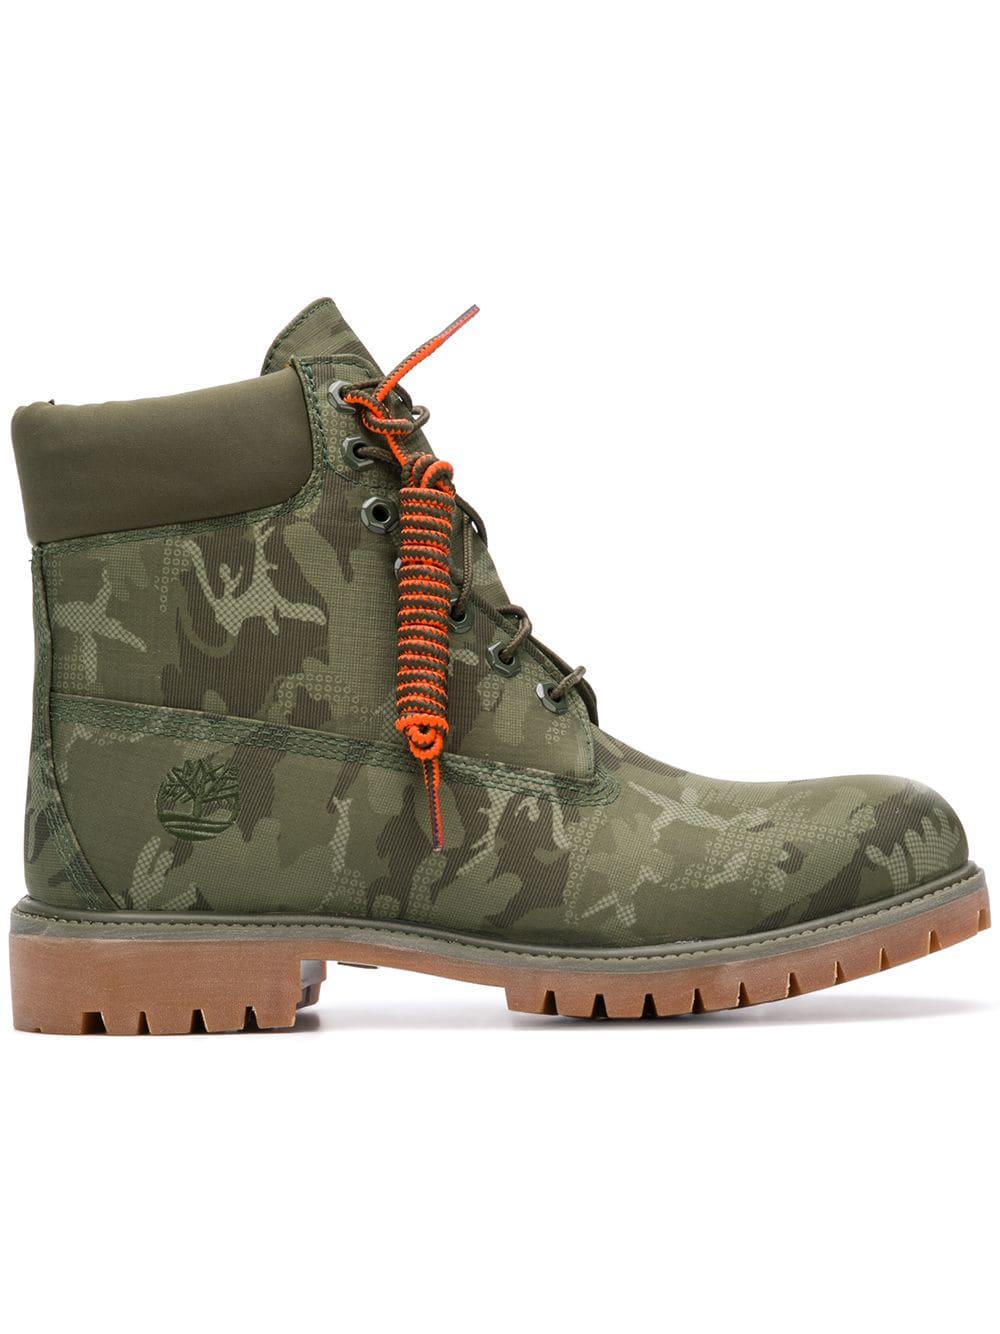 Timberland Rubber Camouflage Lace-up Boots in Green for Men - Lyst